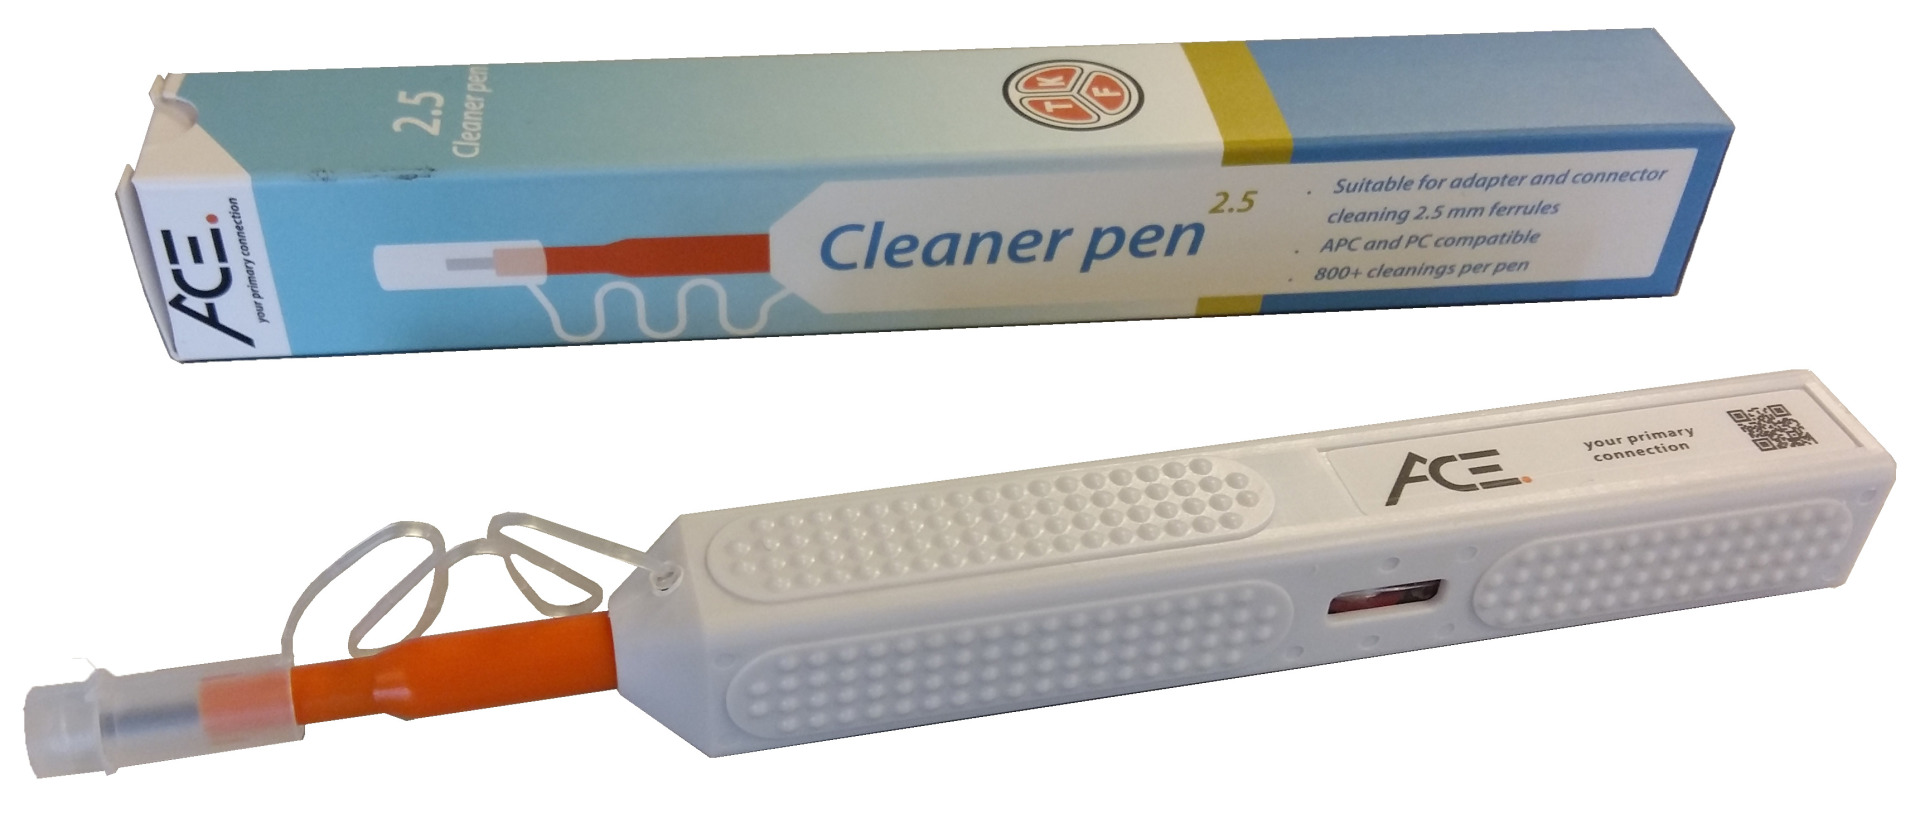 ACE One Clic Cleaner pen 2,5 